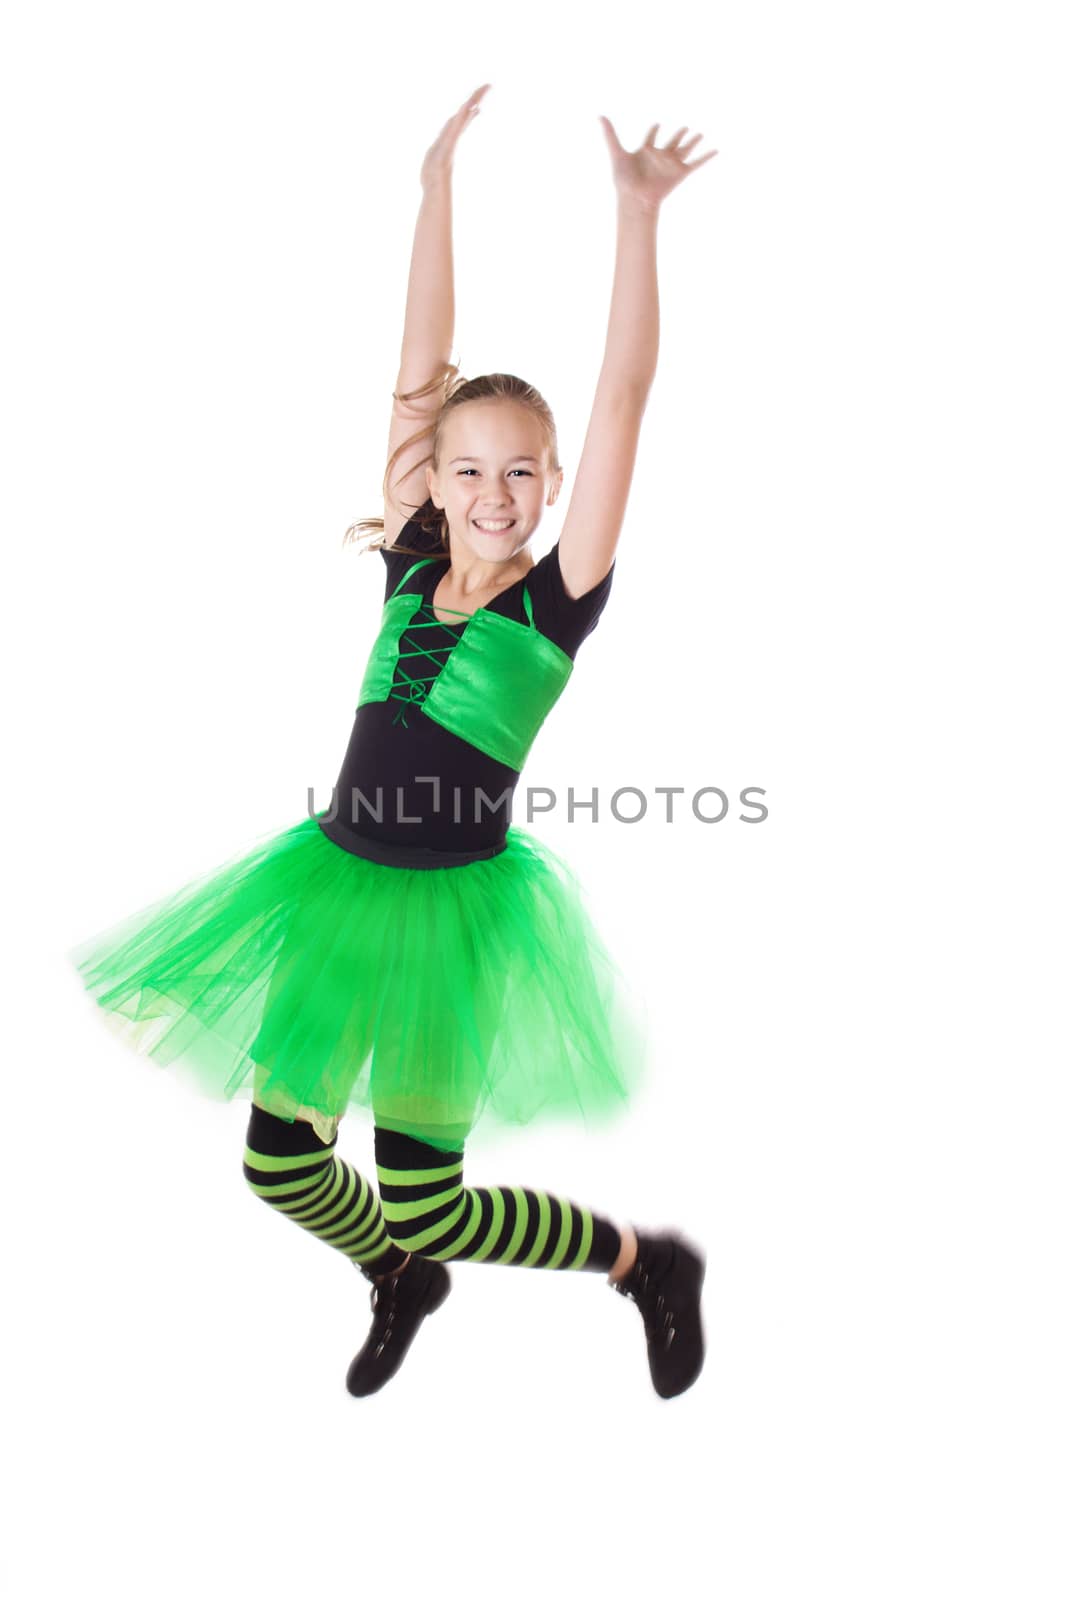 Happy girl in tutu skirt jumping by Angel_a